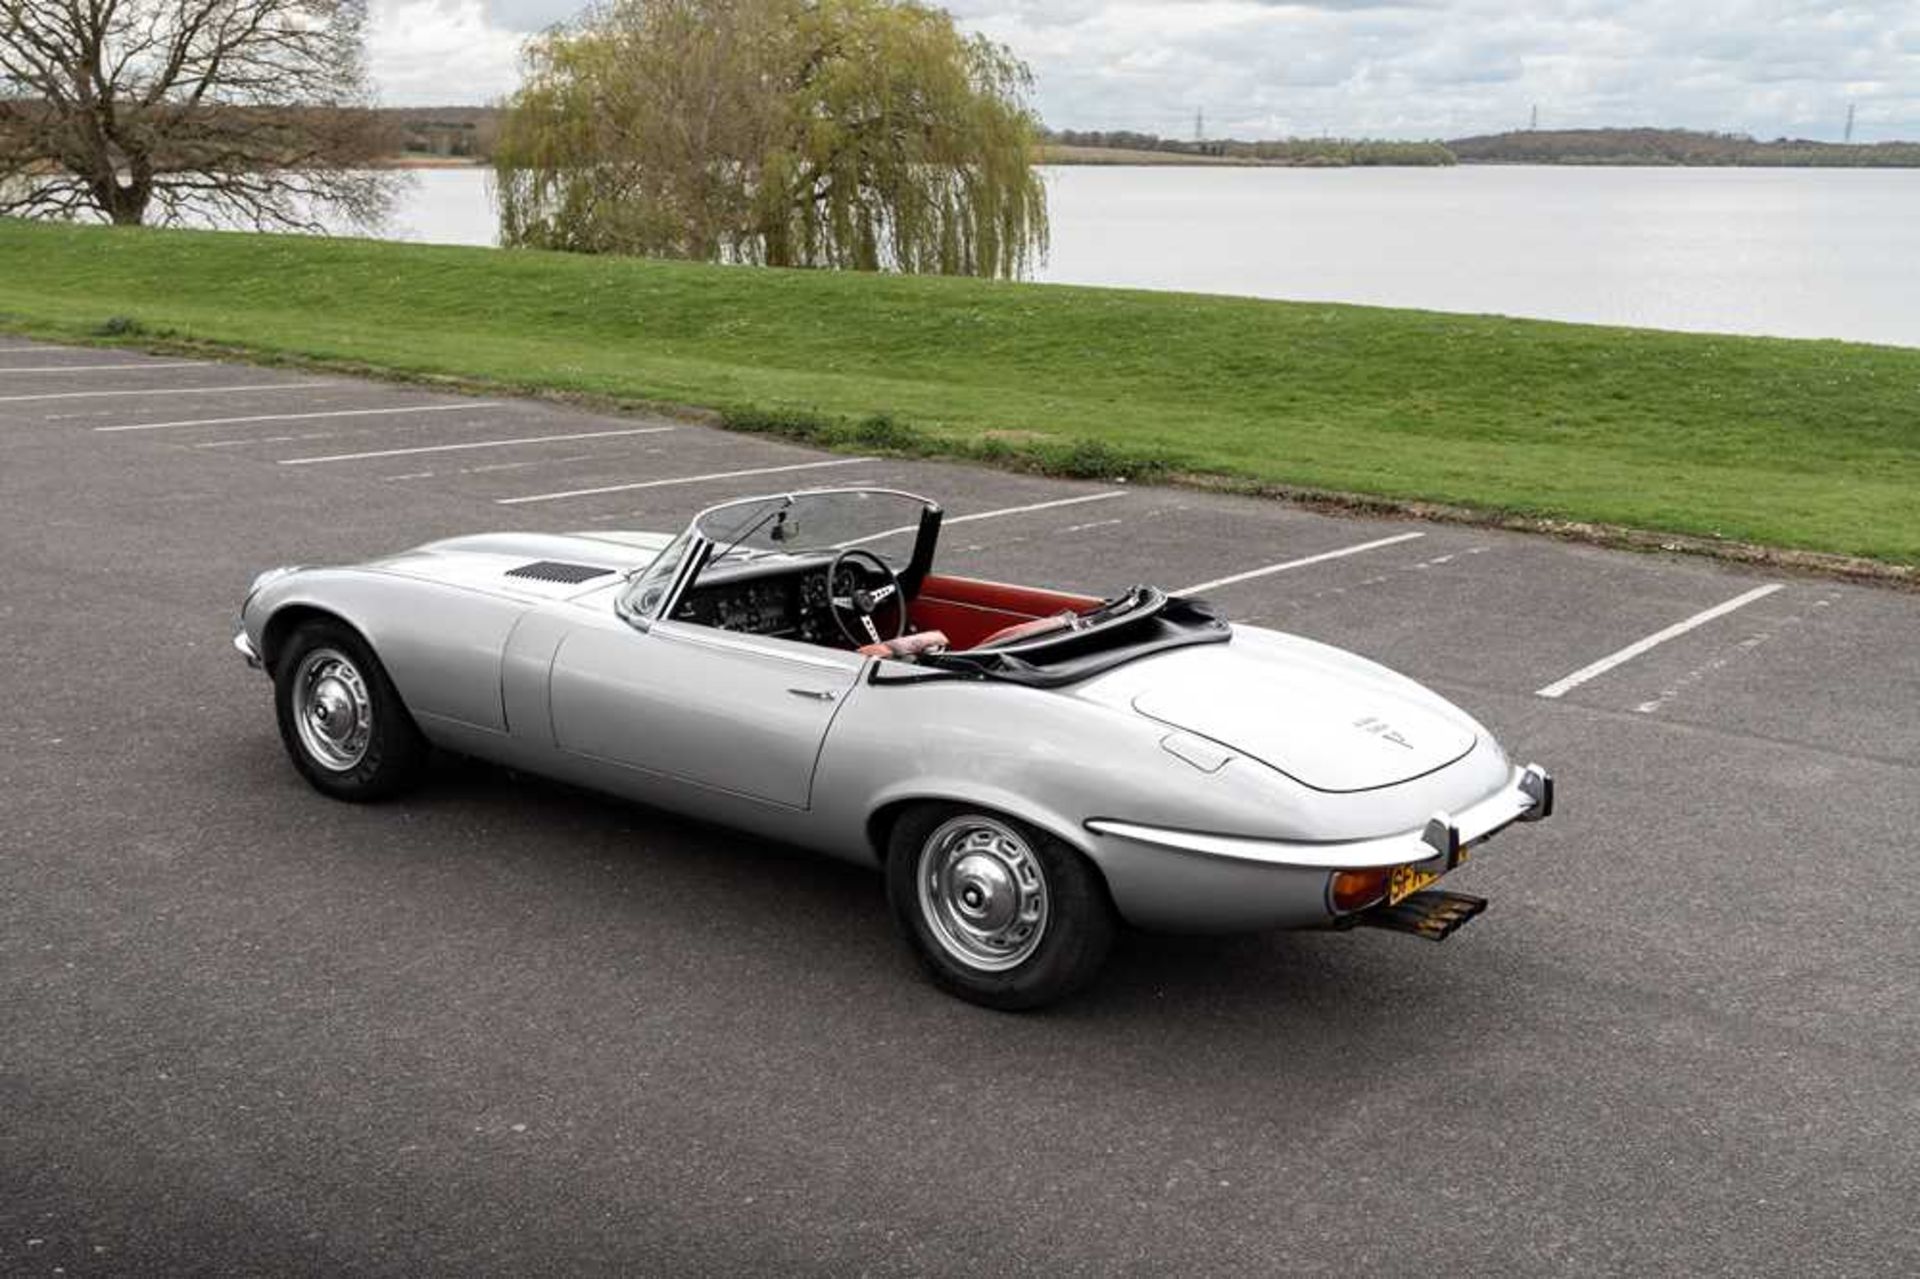 1974 Jaguar E-Type Series III V12 Roadster Only one family owner and 54,412 miles from new - Image 6 of 89